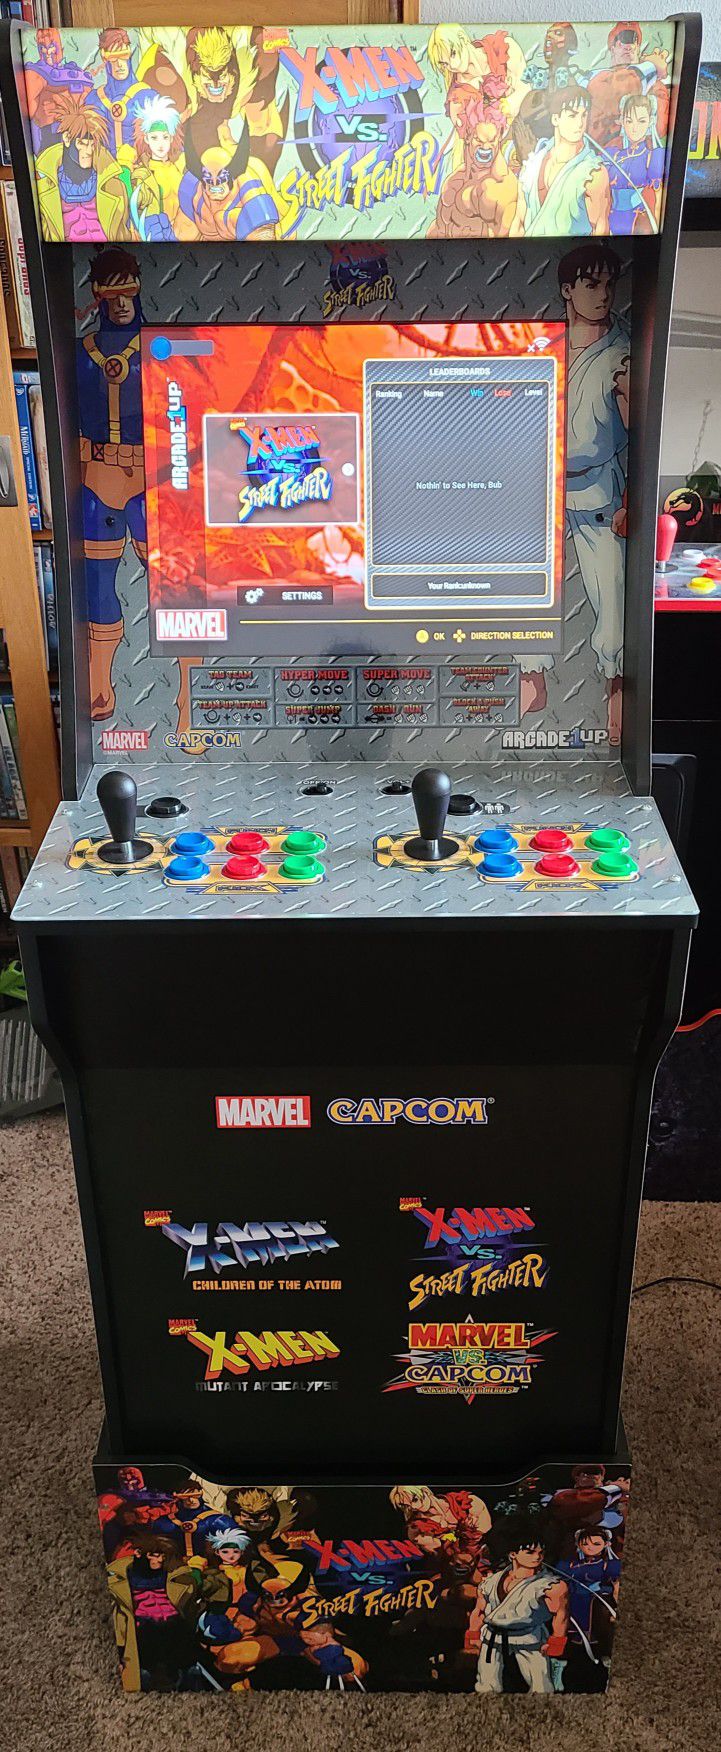 Arcade1Up X-Men vs. Street Fighter Arcade Video Game with Riser 